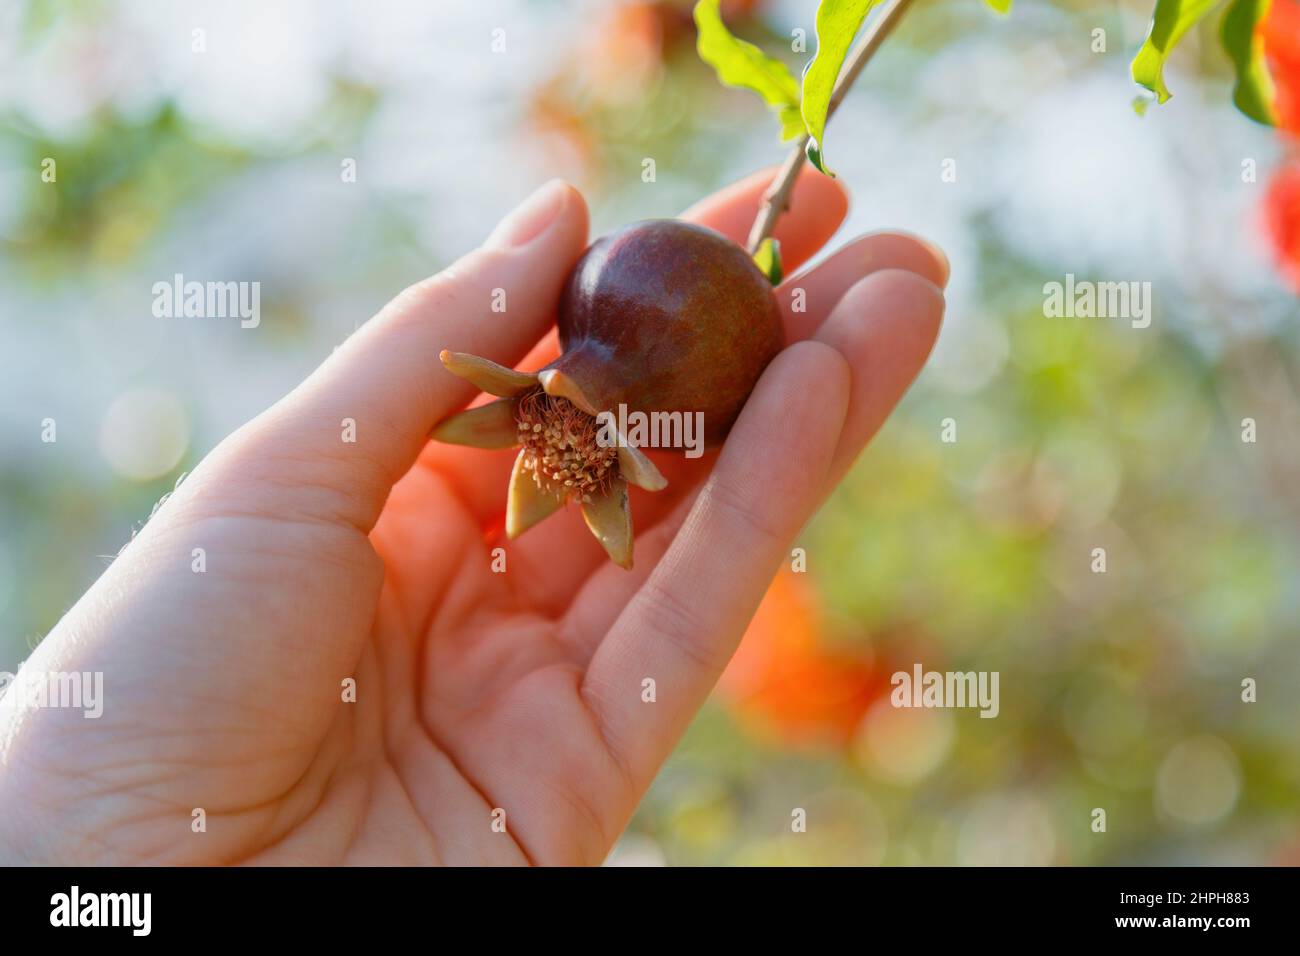 Small pomegranate in female hand. Process of growing and harvesting Red pomegranate fruit In garden on farm. Woman picks a small red pomegranate Stock Photo